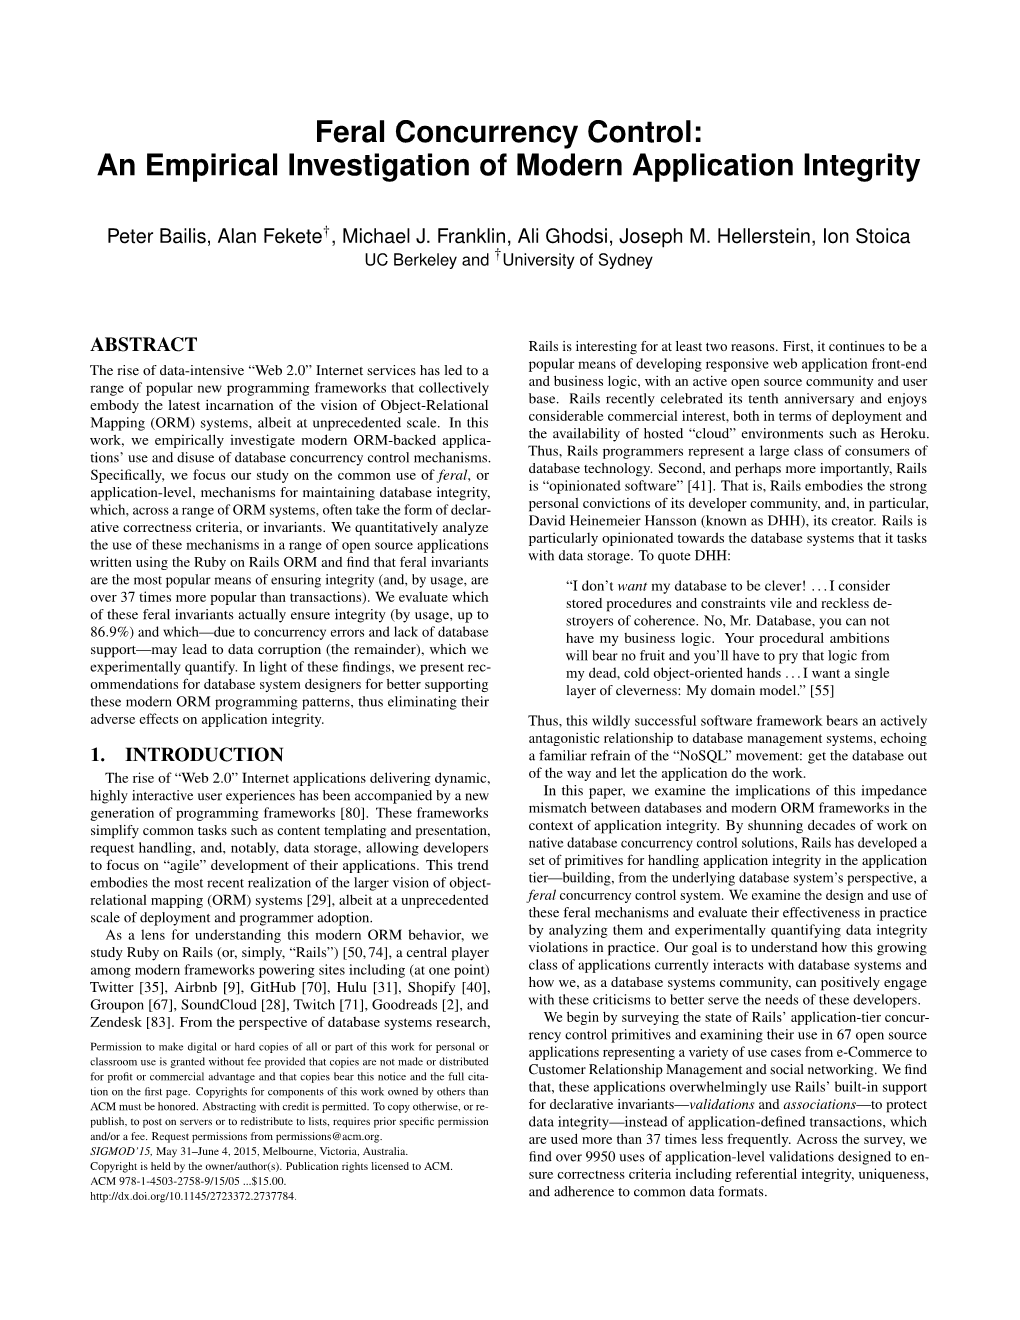 Feral Concurrency Control: an Empirical Investigation of Modern Application Integrity